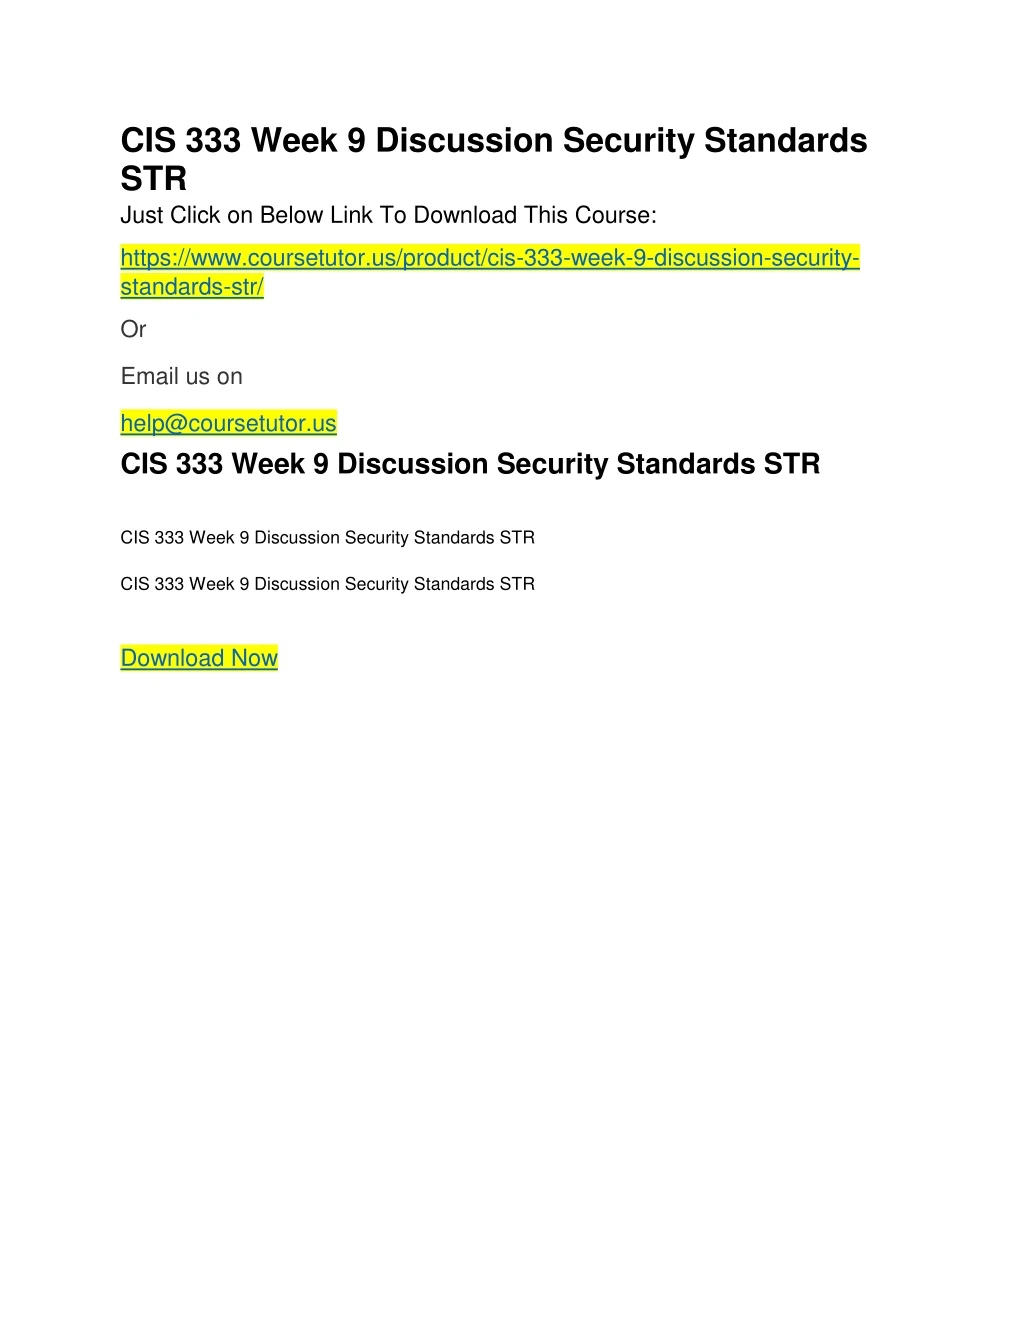 cis 333 week 9 discussion security standards